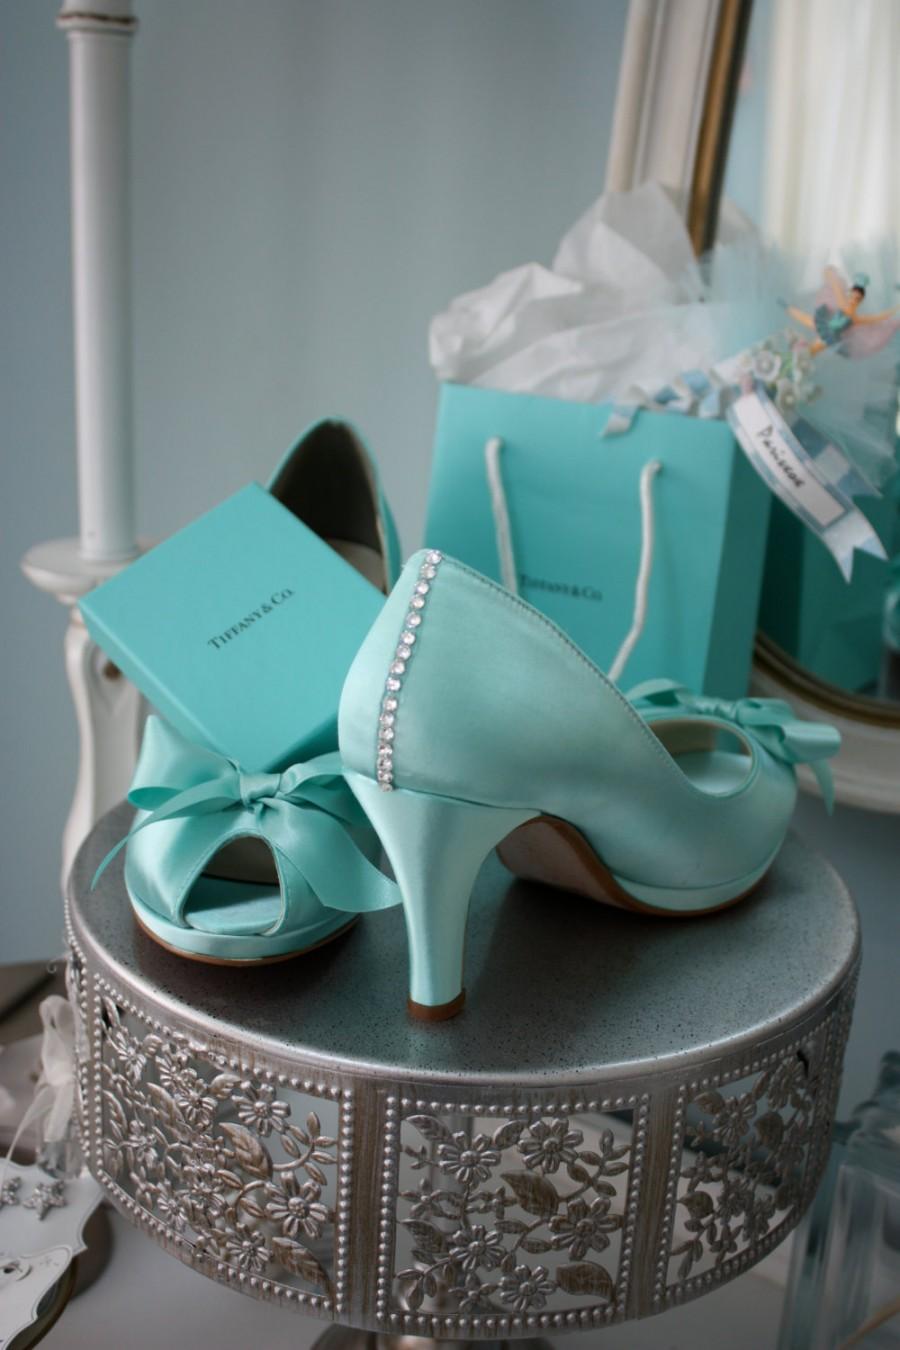 Wedding - Wedding Shoes - Aqua  Blue - Crystals - Aqua Blue Wedding - Dyeable Choose From Over 100 Colors - Wide Sizes Available - Shoes Parisxox